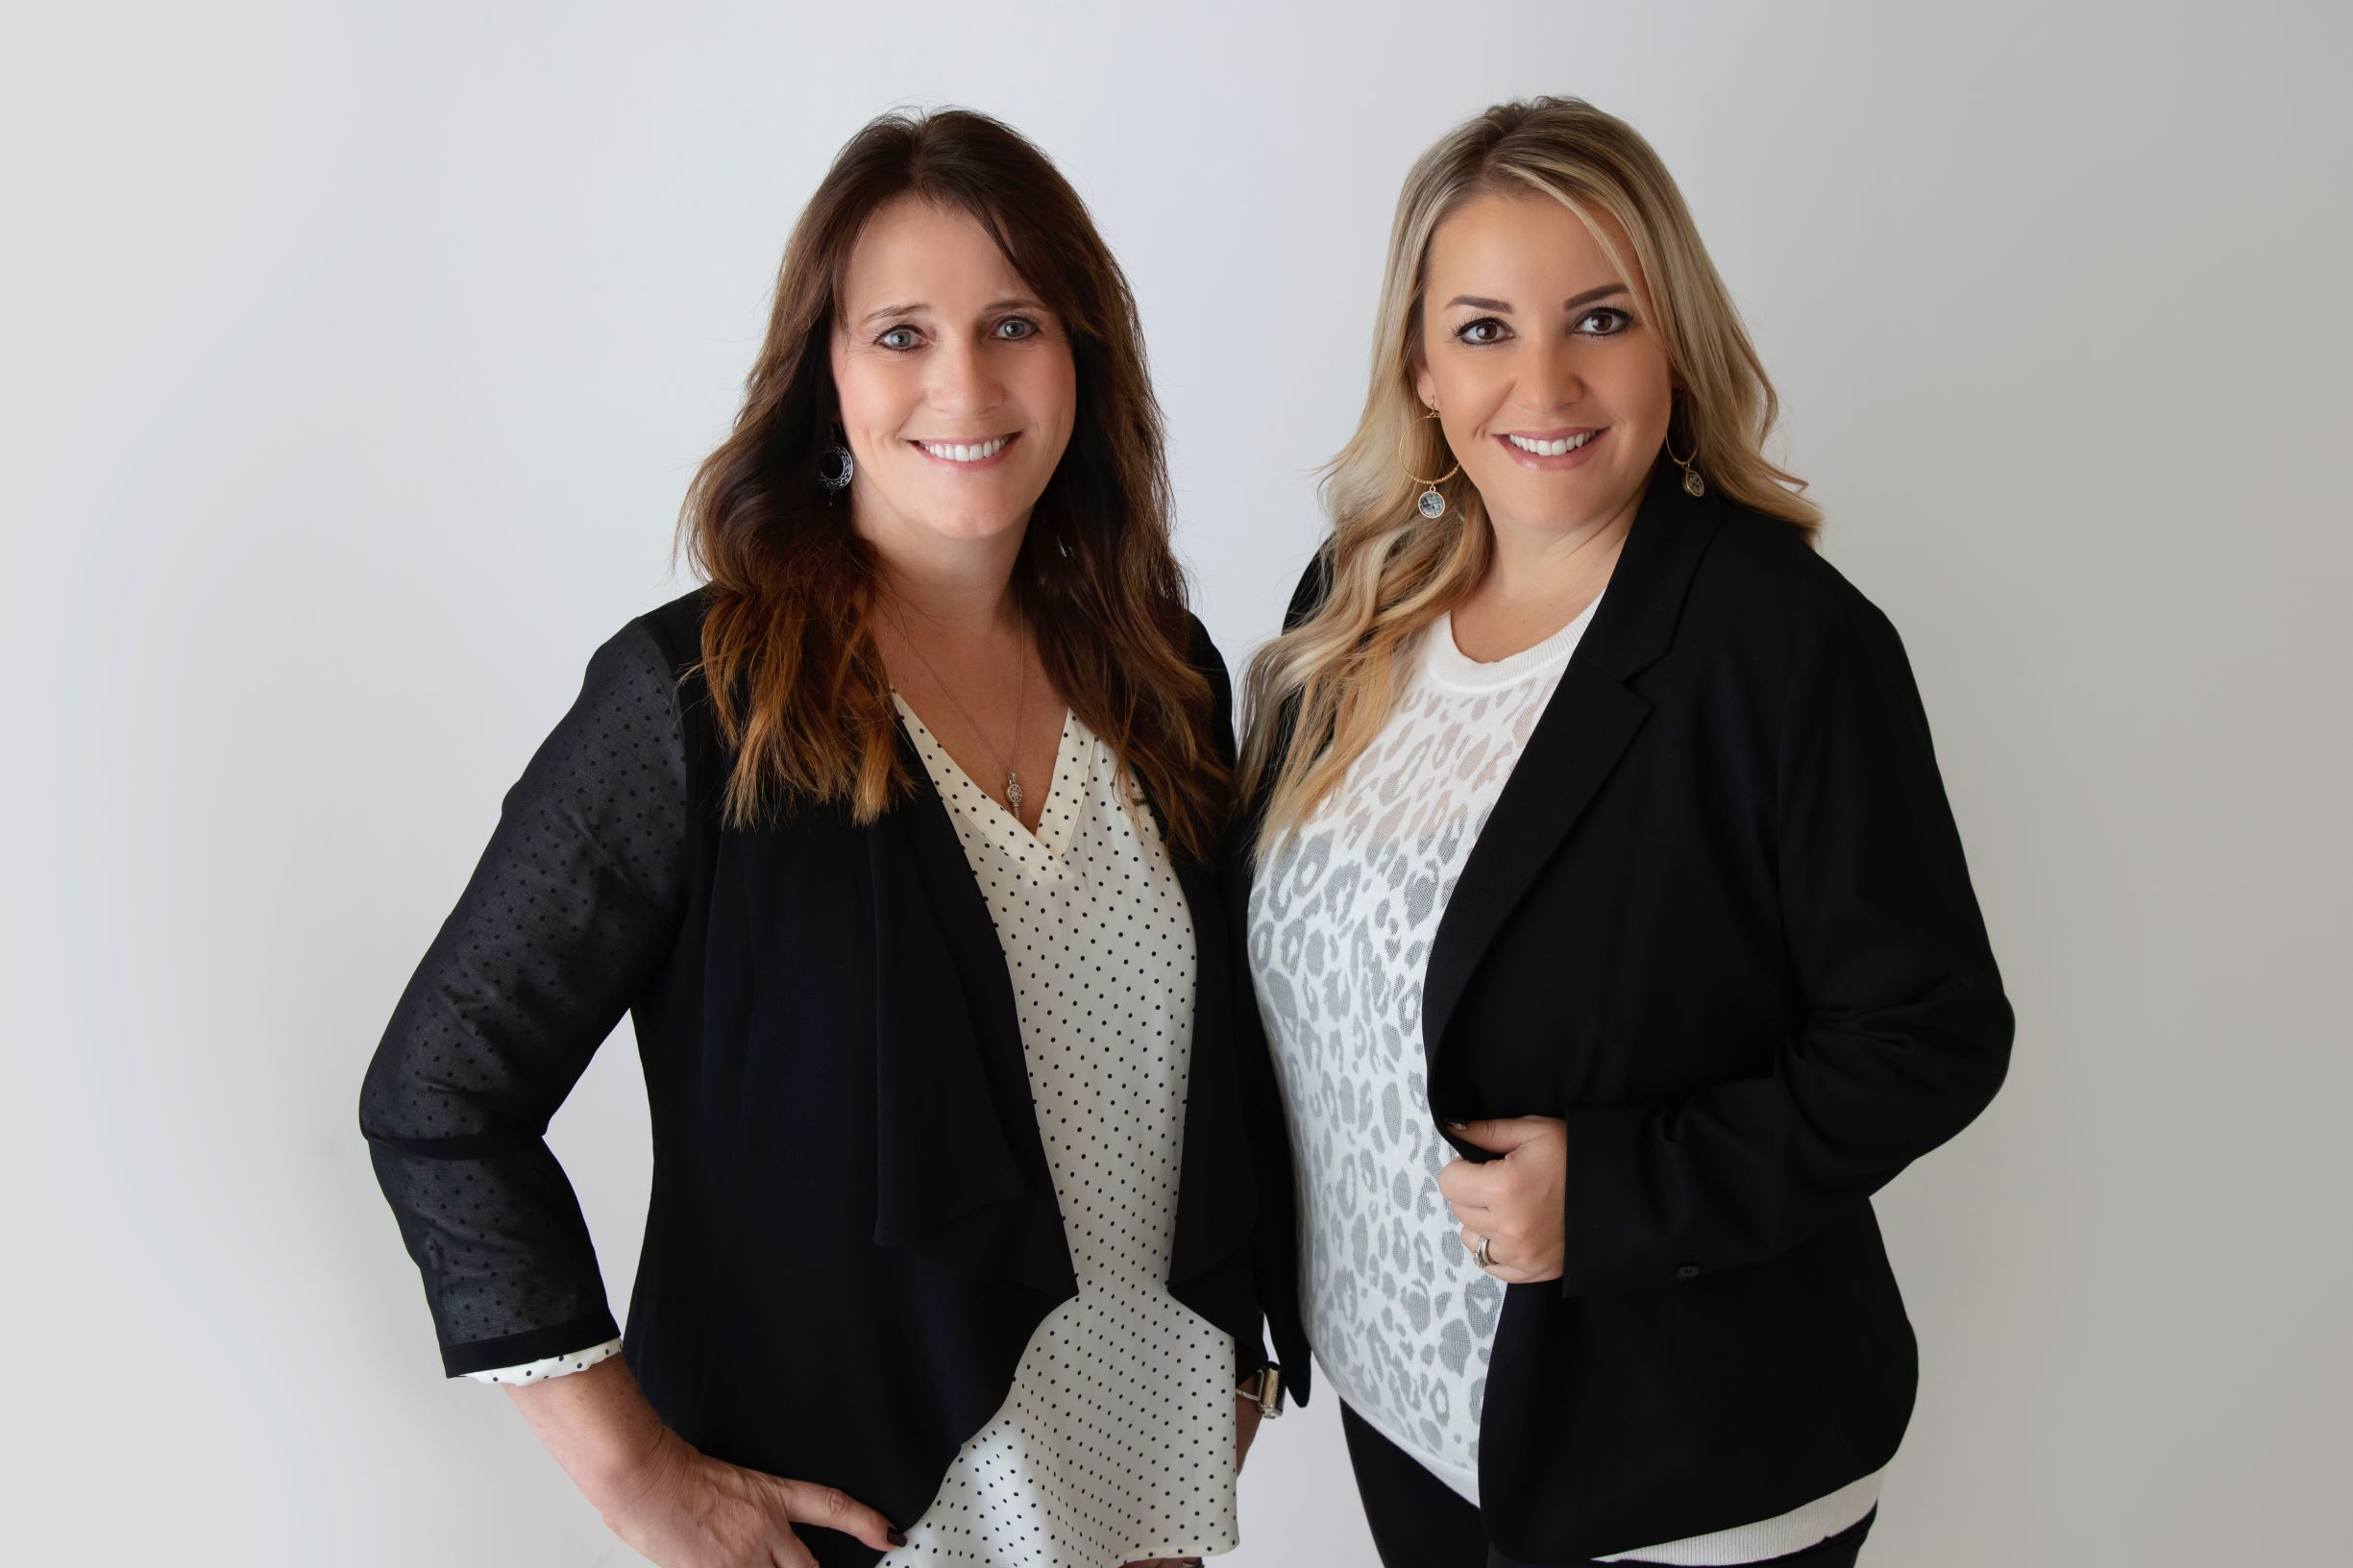 Real Estate agents Tami Wooten and Mandi Riddle